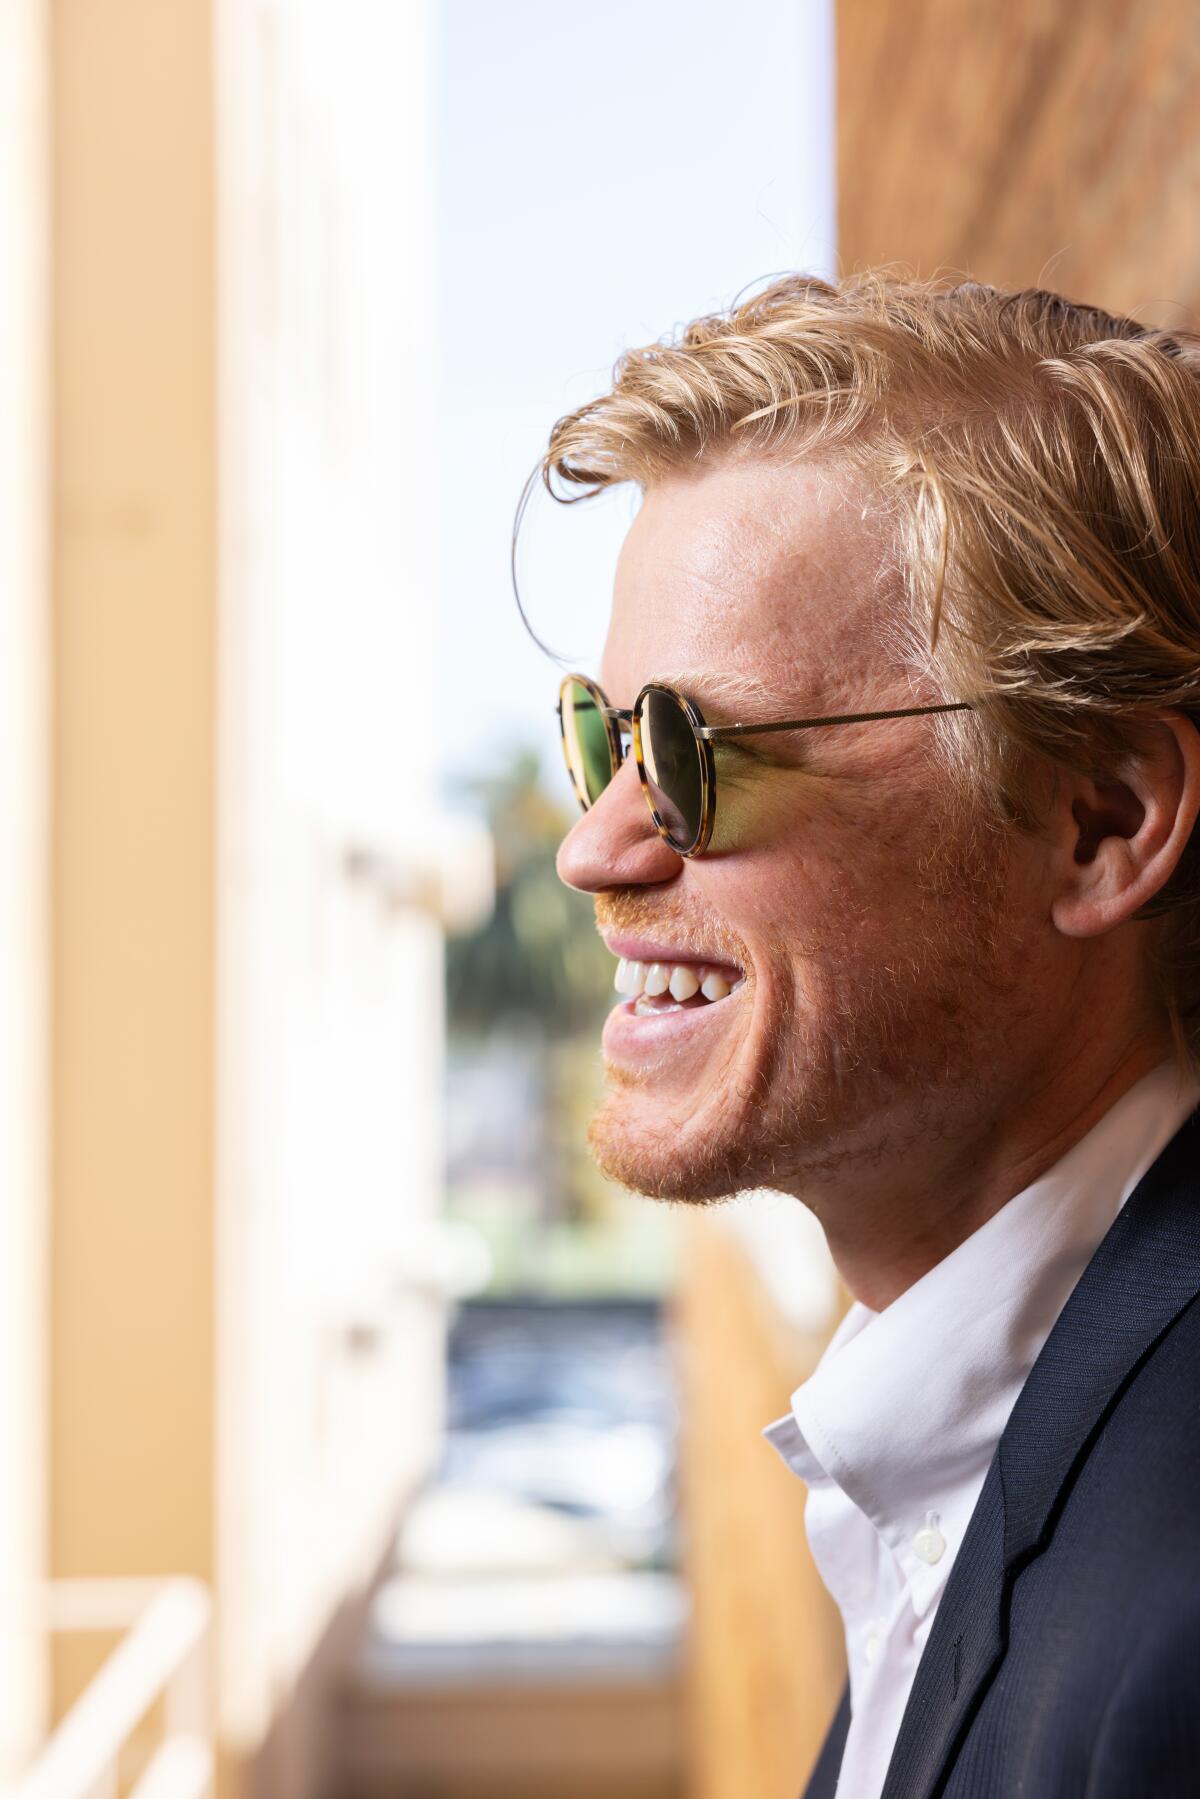 Jesse Plemons wearing sunglasses and a wide smile.